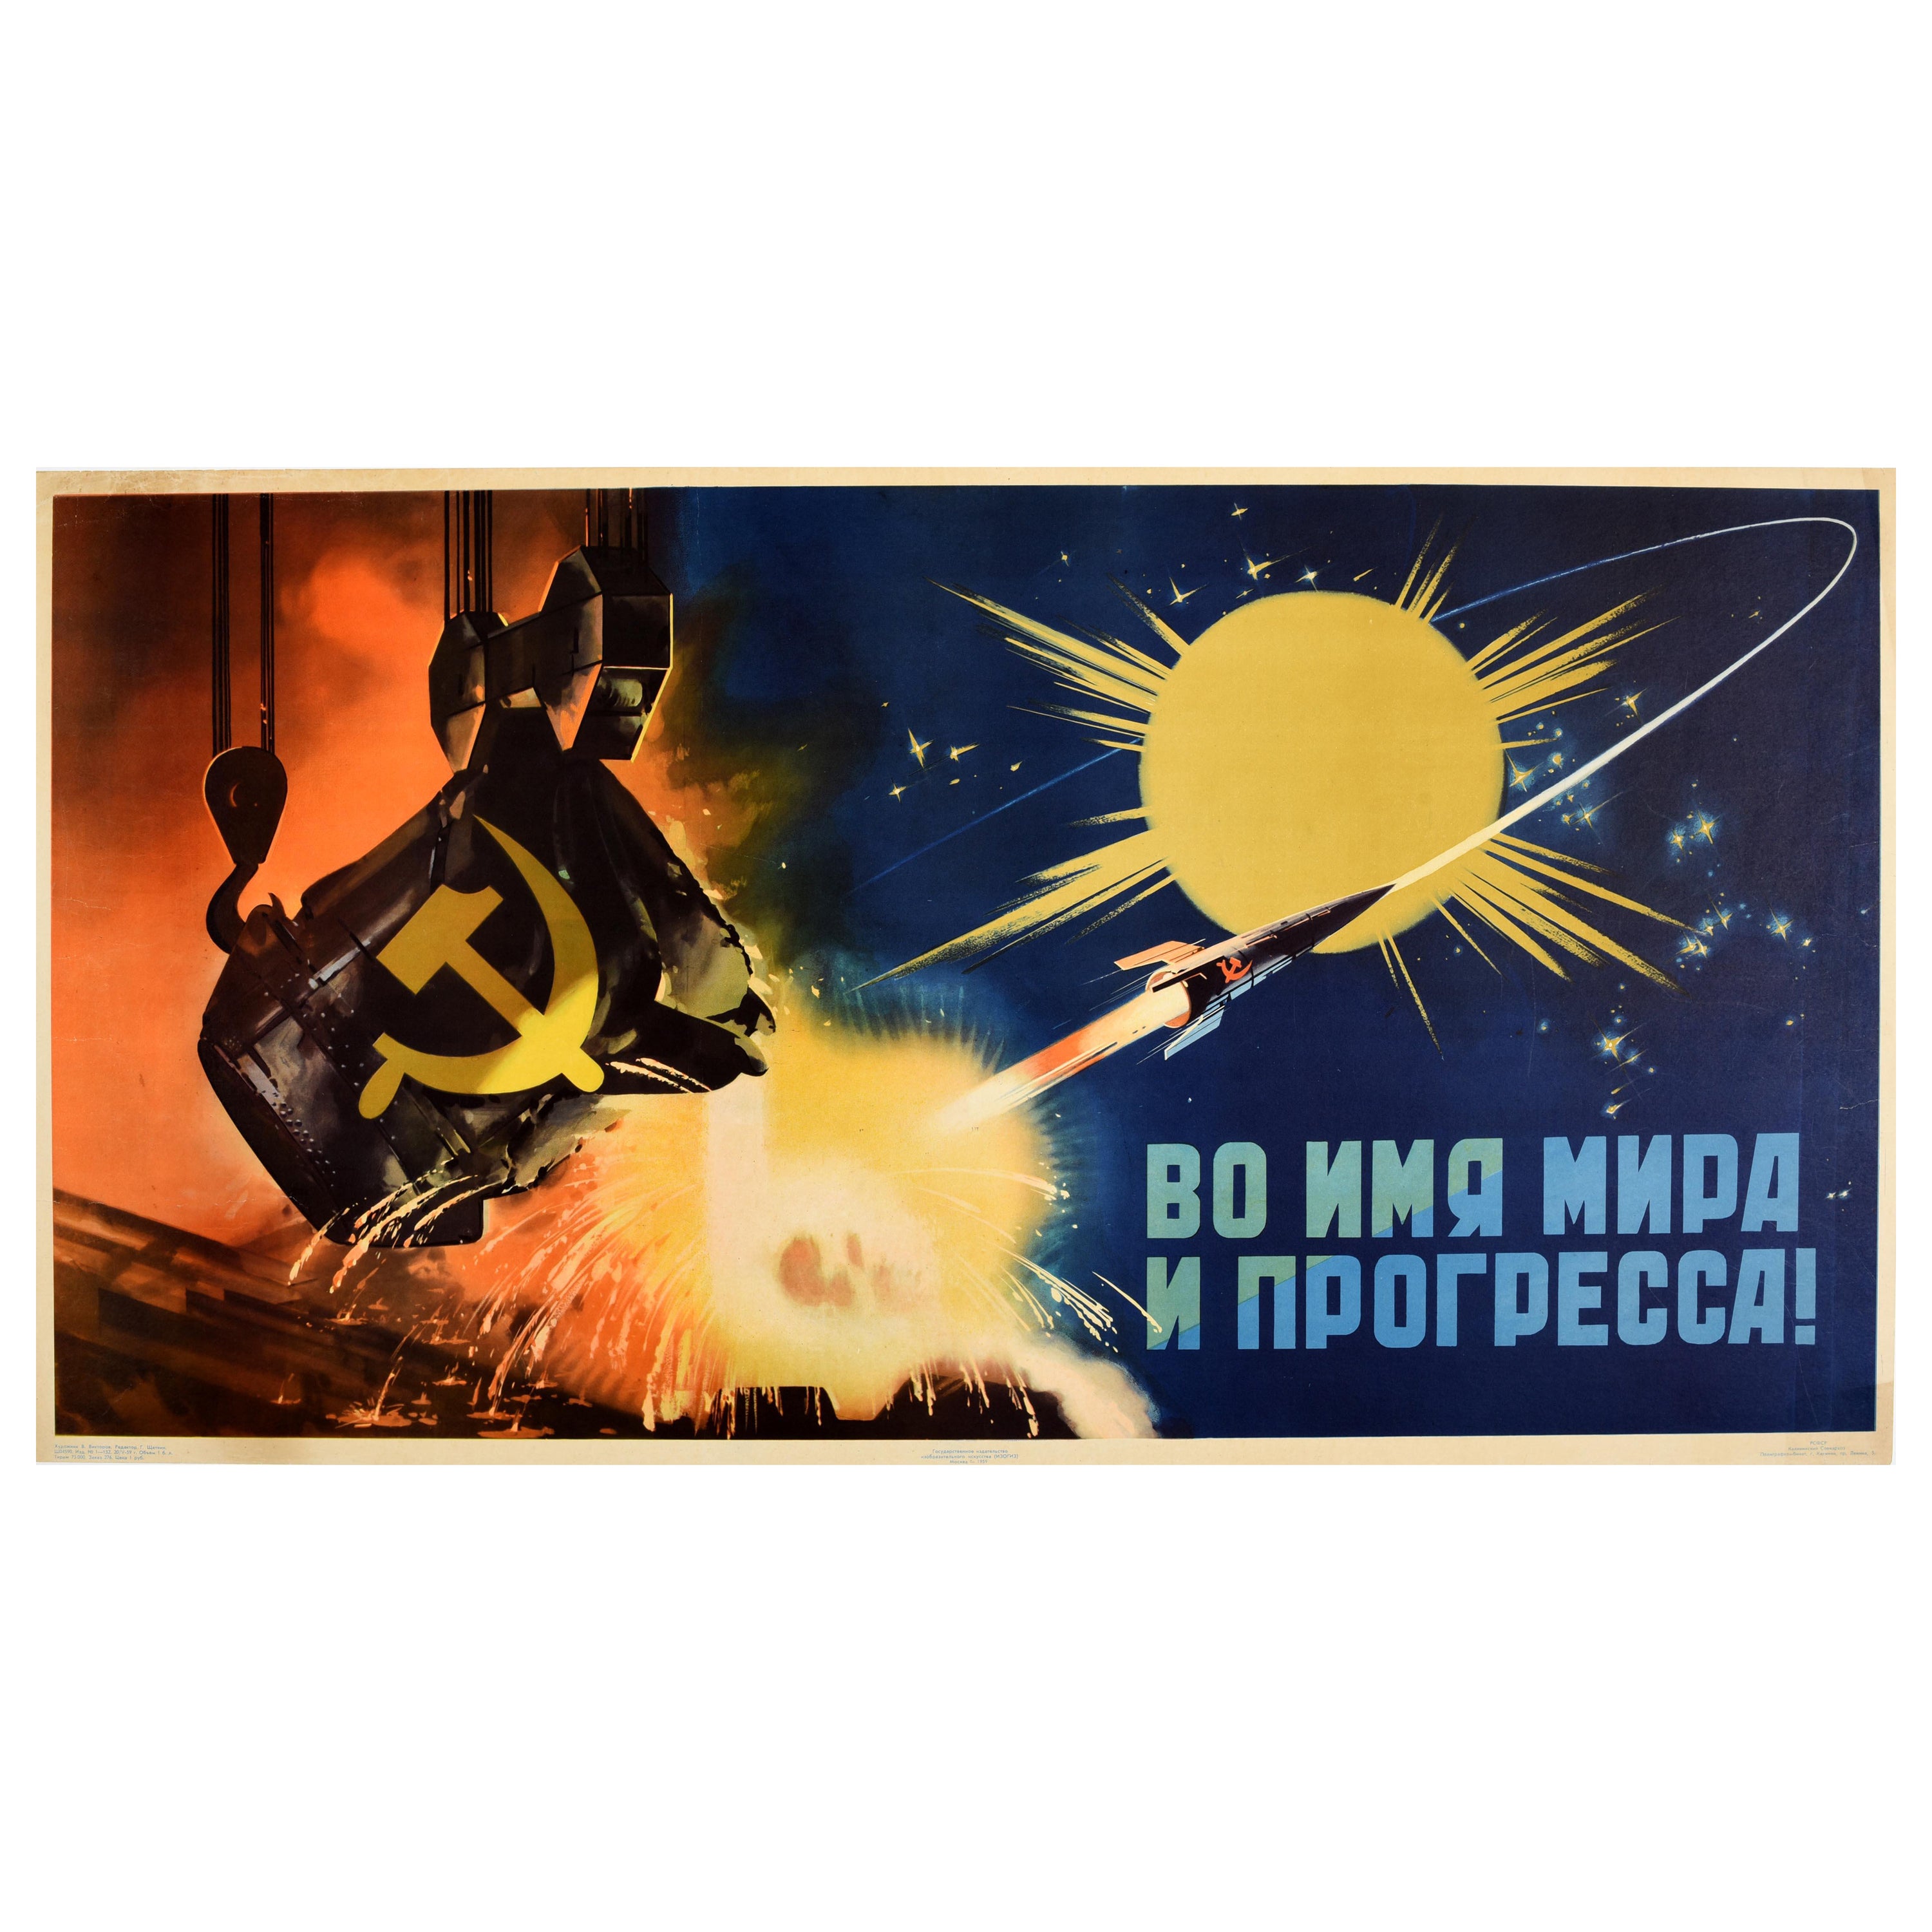 Original Vintage Soviet Poster In The Name Of Peace And Progress USSR Space Race